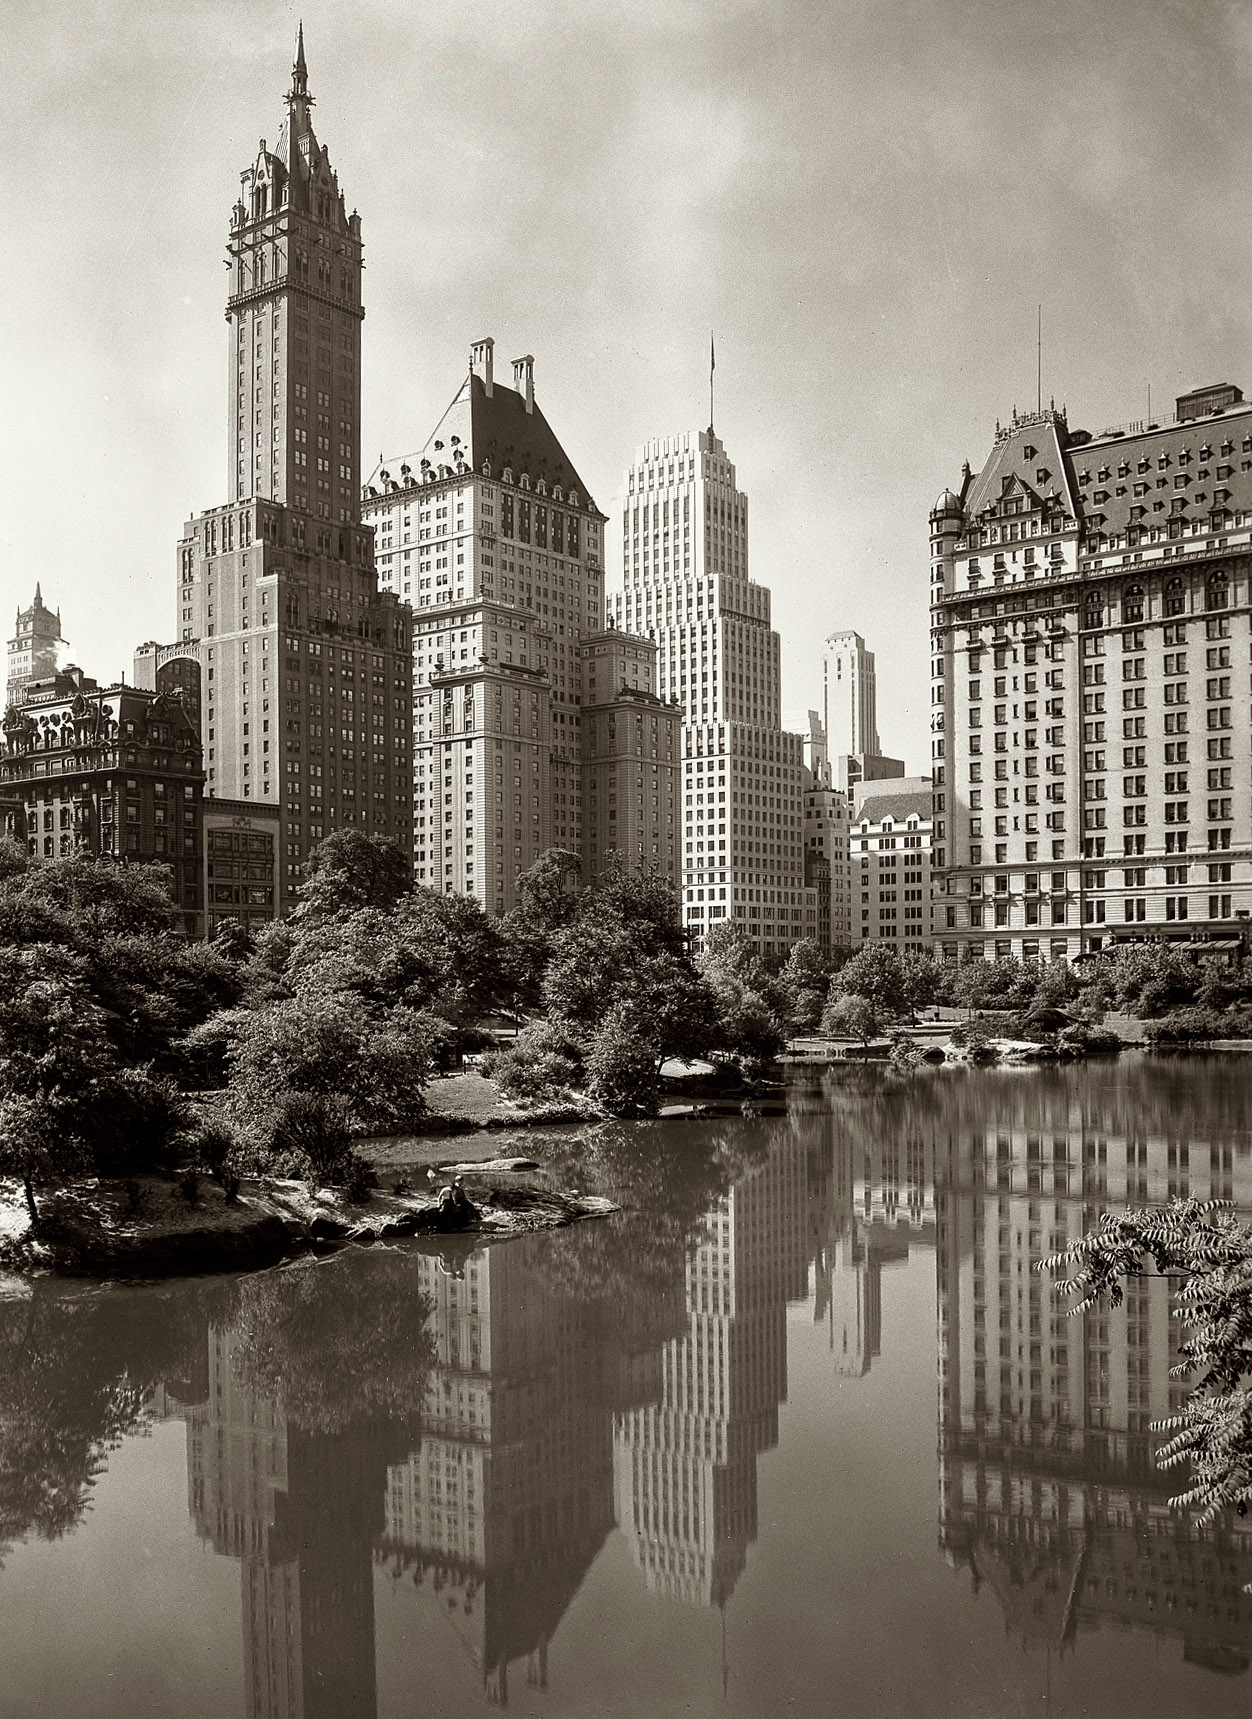 1933. A view across New York's Central Park Lake framed by the Sherry-Netherland and Plaza hotels. 5x7 safety negative by the noted architectural photographer Samuel H. Gottscho. View full size.